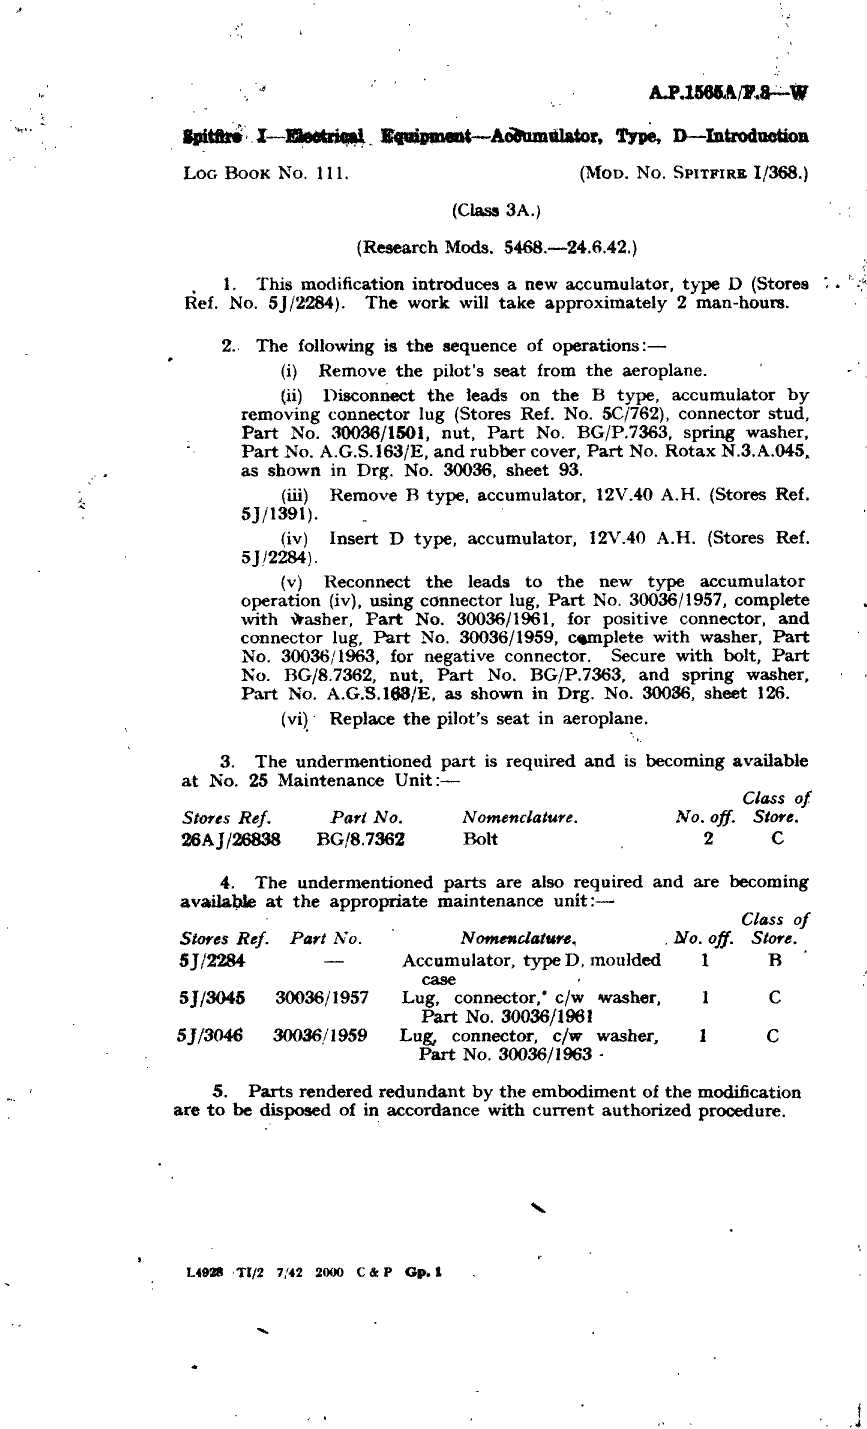 Sample page 1 from AirCorps Library document: Spitfire I Electrical Equipment Accumulator Type D Introduction